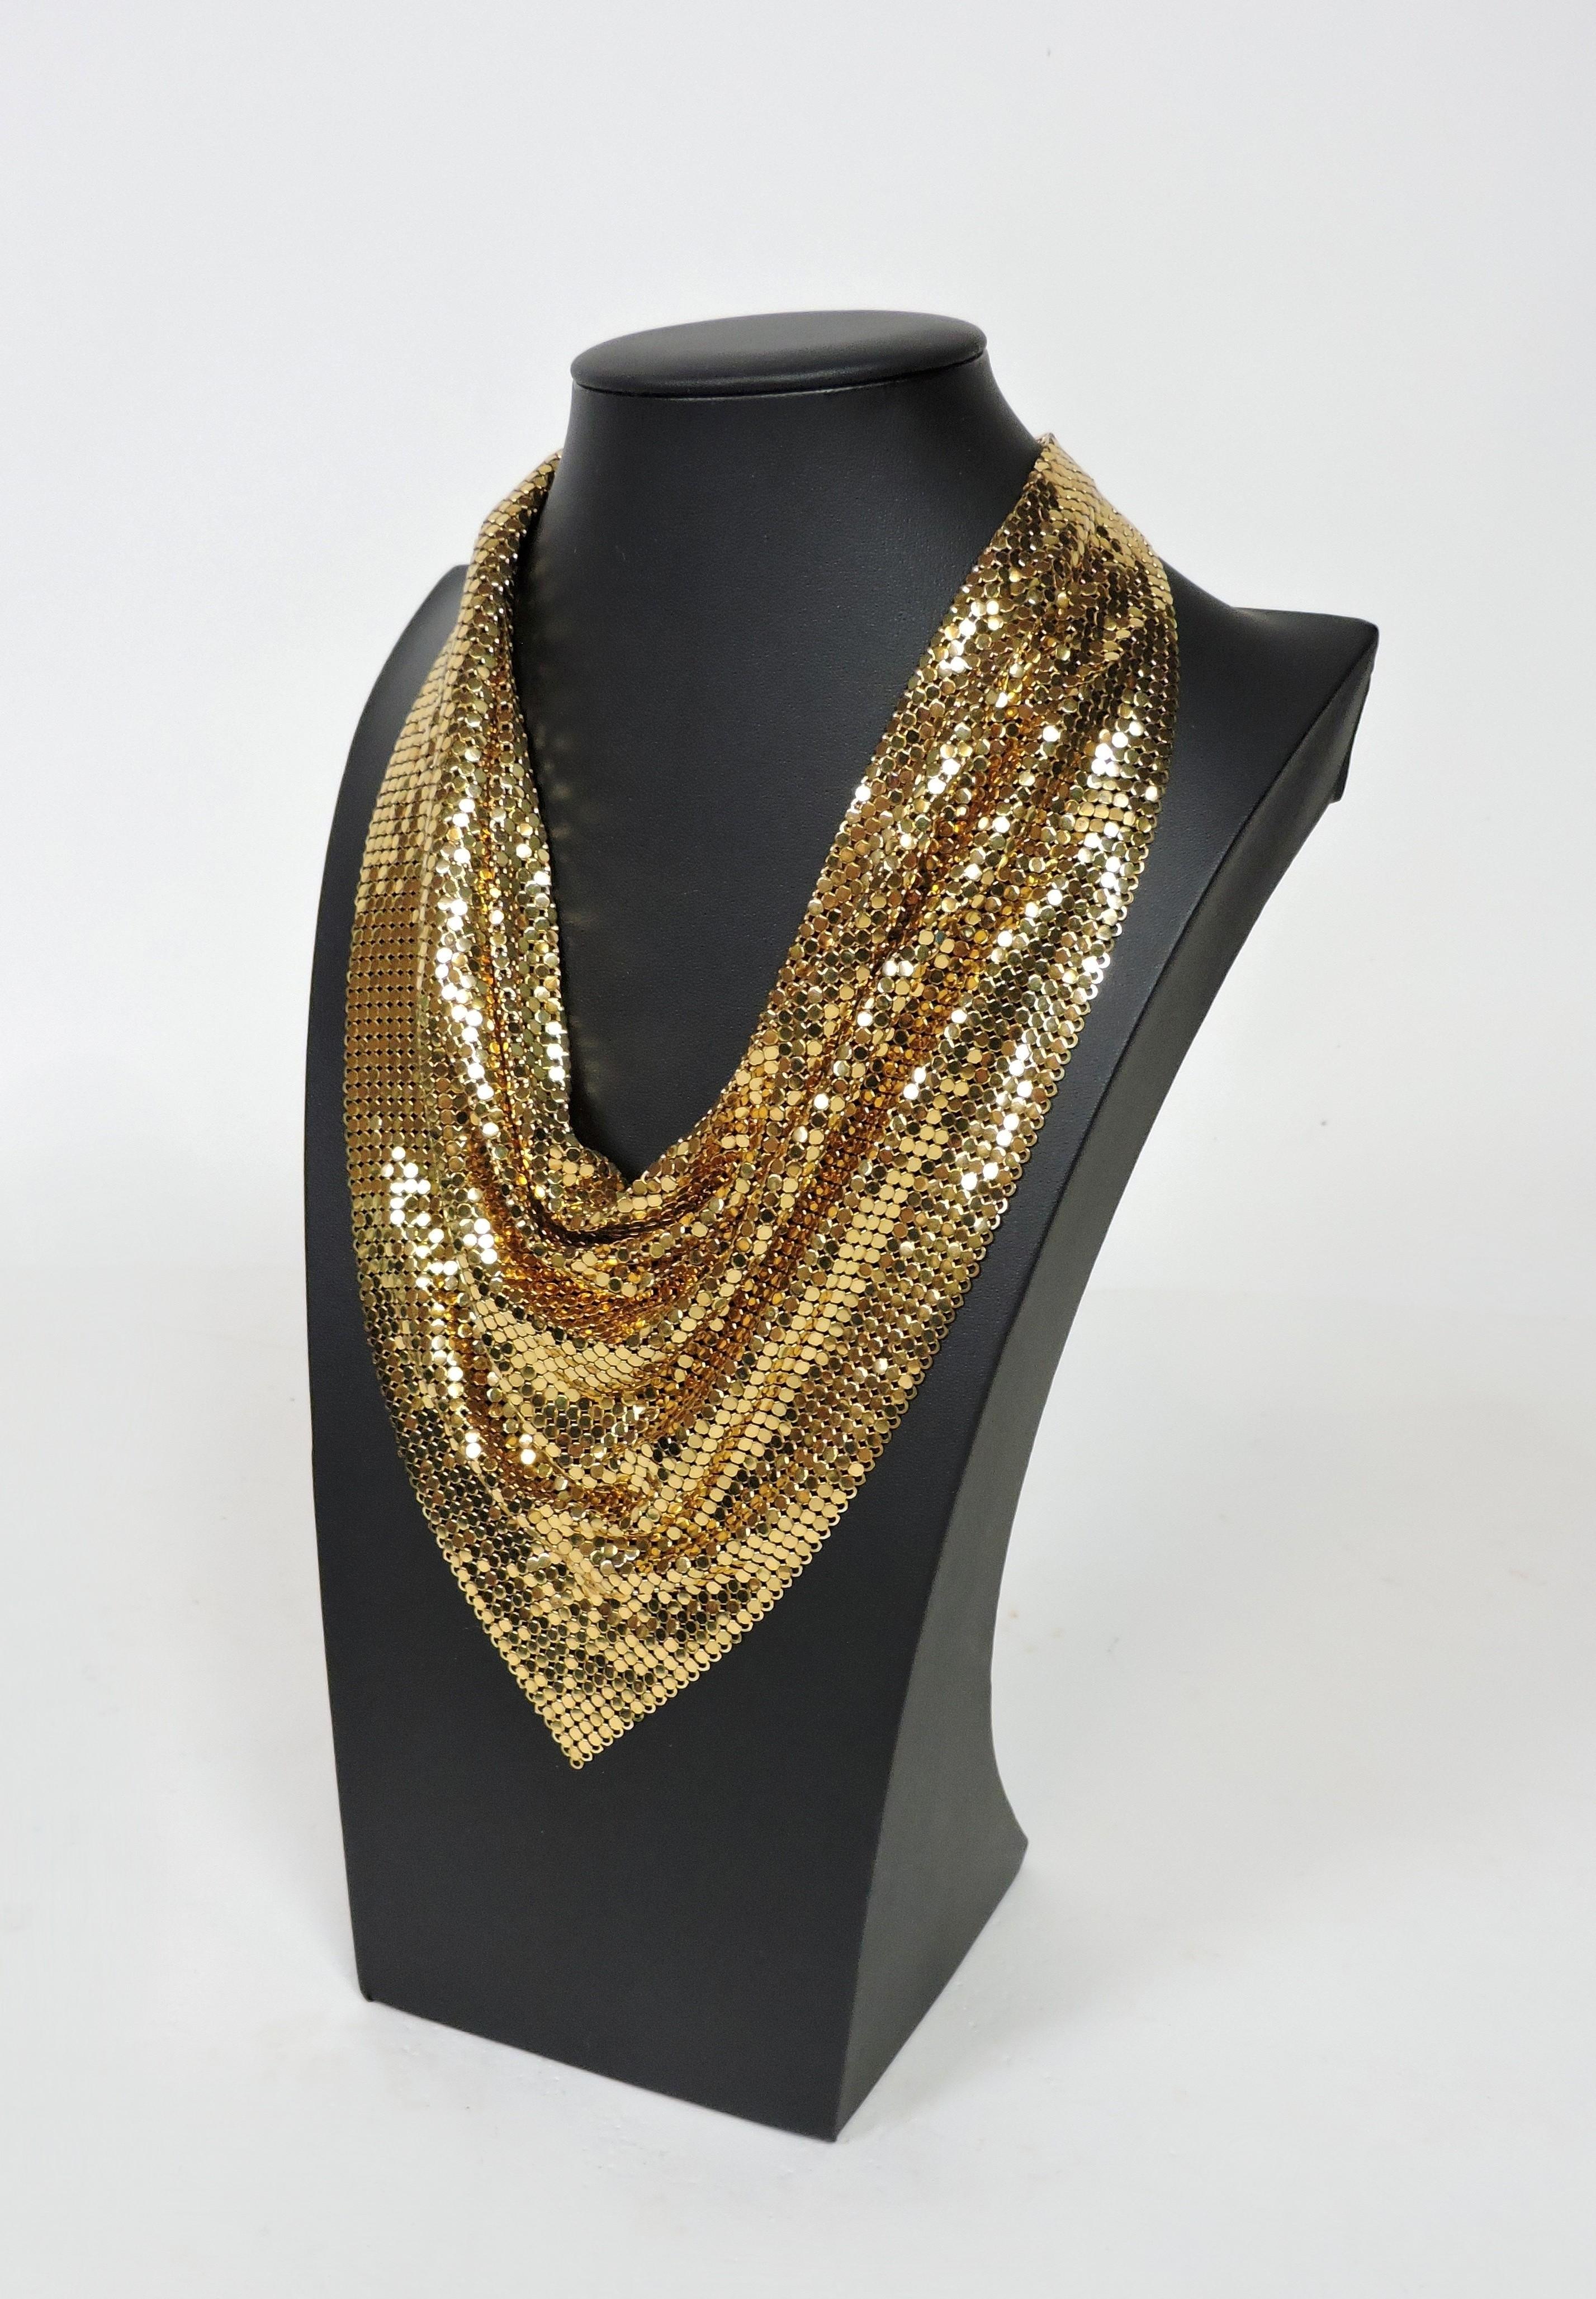 Glamorous gold tone mesh necklace manufactured by Whiting and Davis Co. This high quality necklace drapes beautifully and has an approximately 10 inch drop as pictured on the mannequin. Somewhat adjustable with a hook and chain closure on the back.